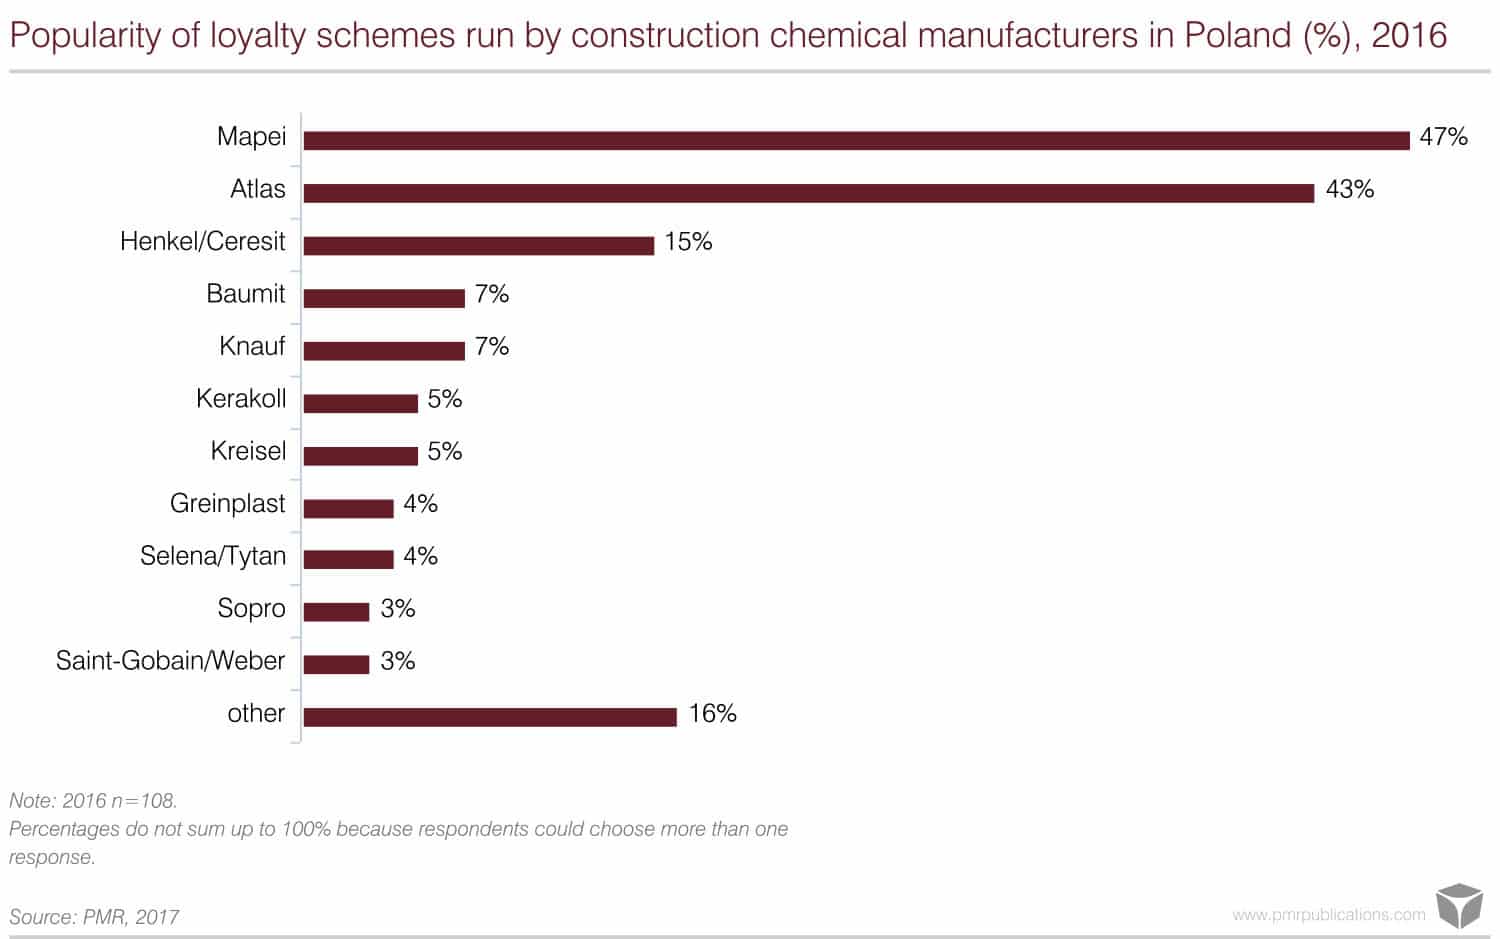 Construction chemicals market in Poland